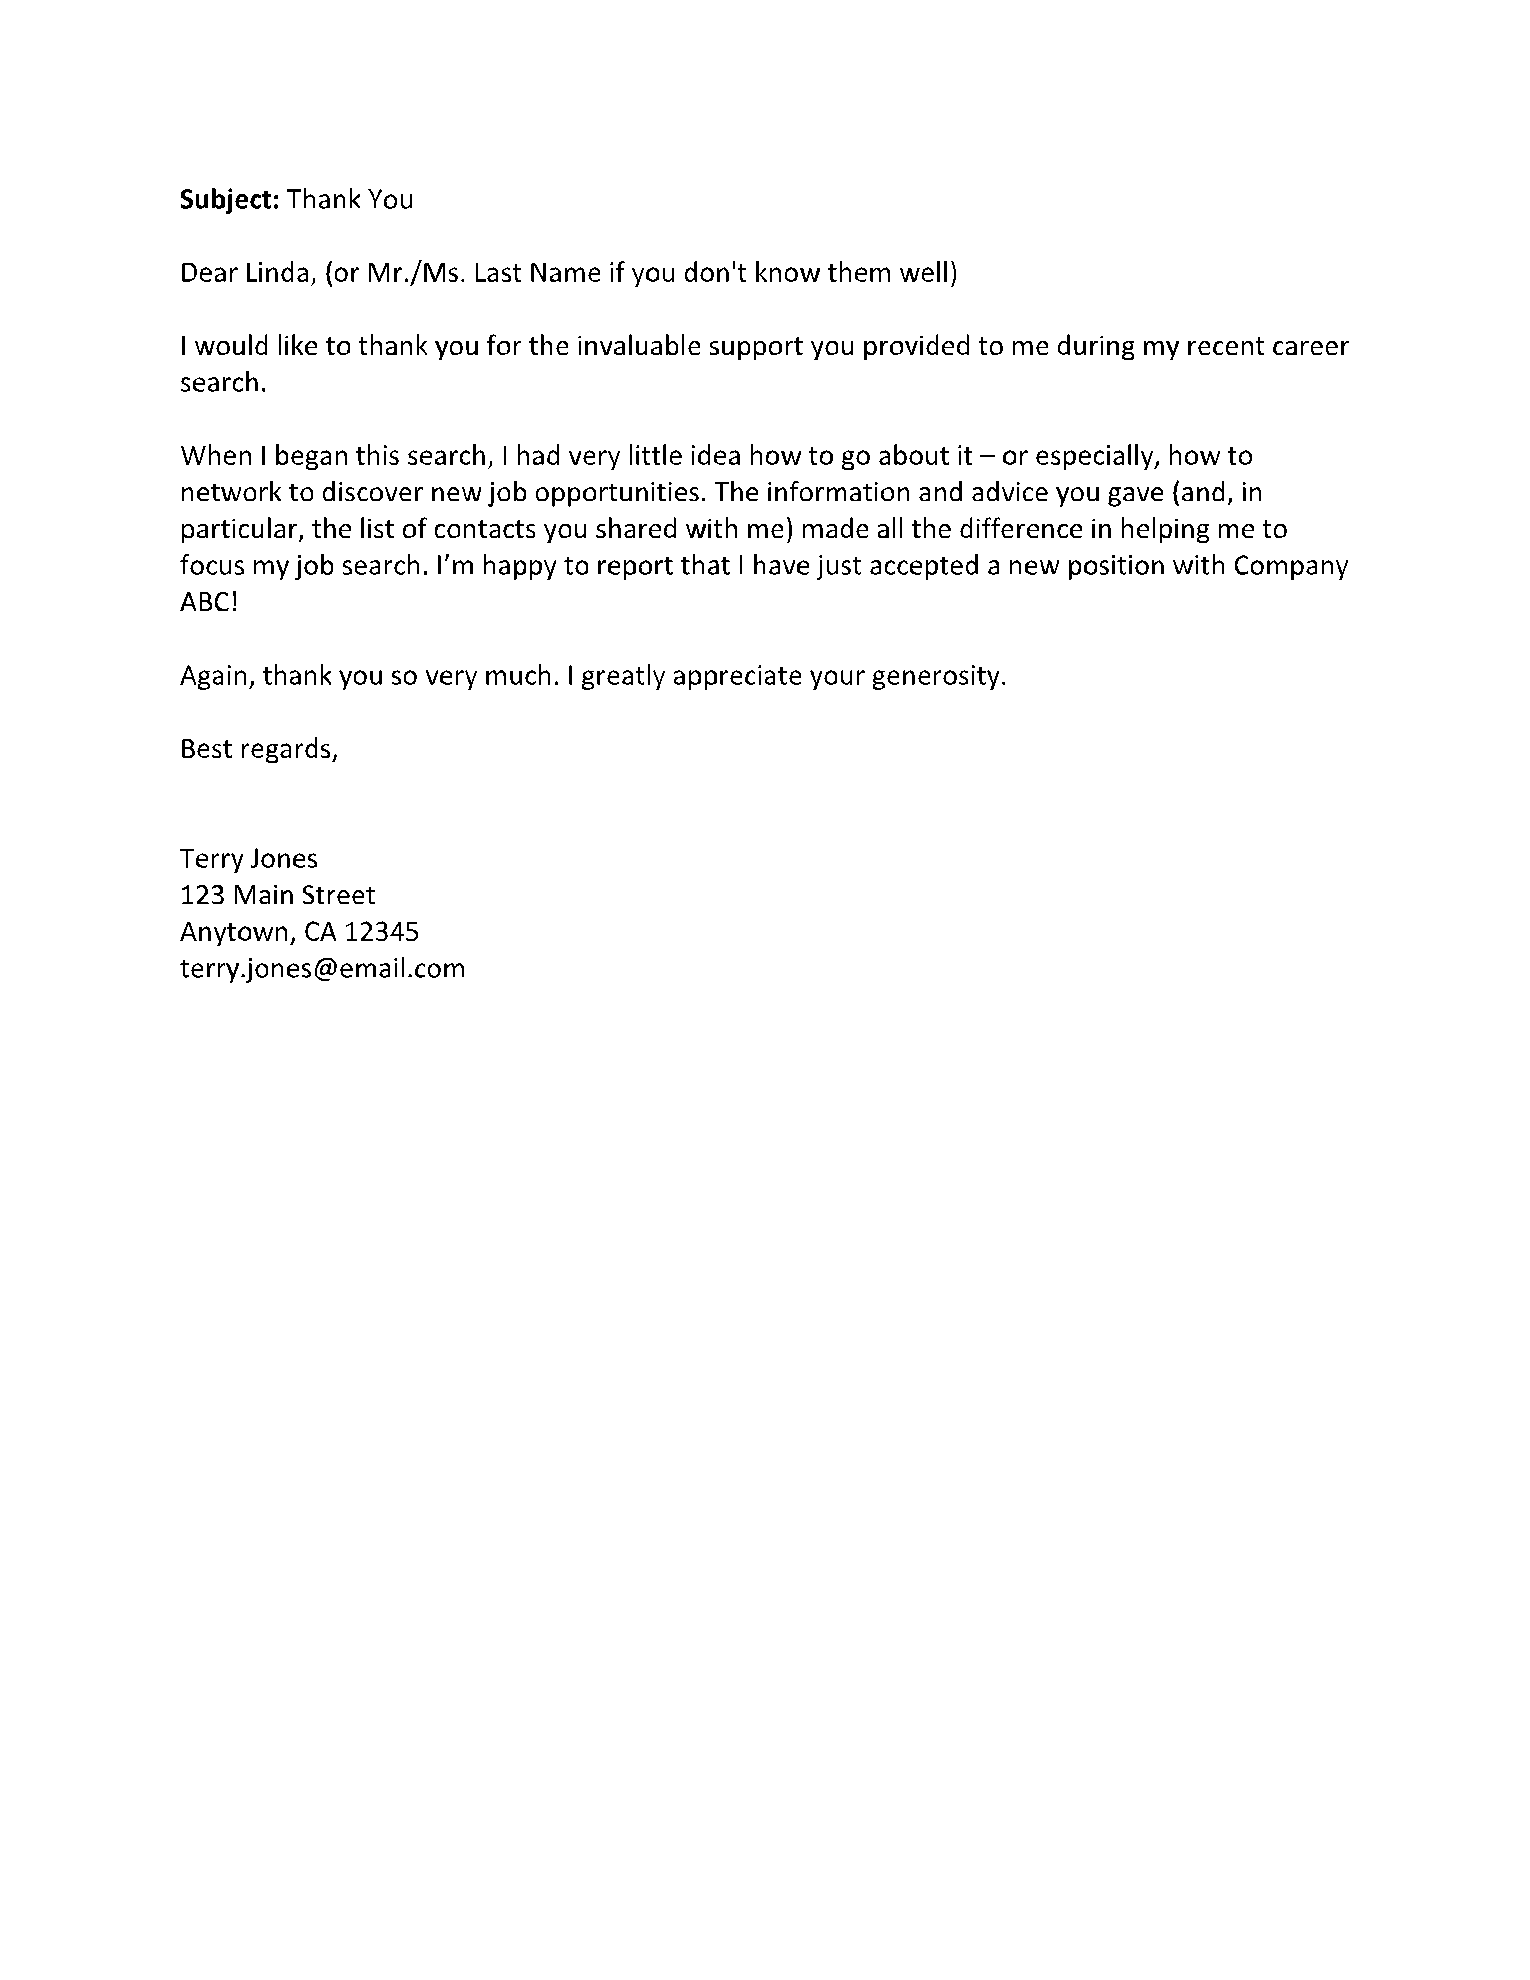 Thank you Letter for Recommendation 2